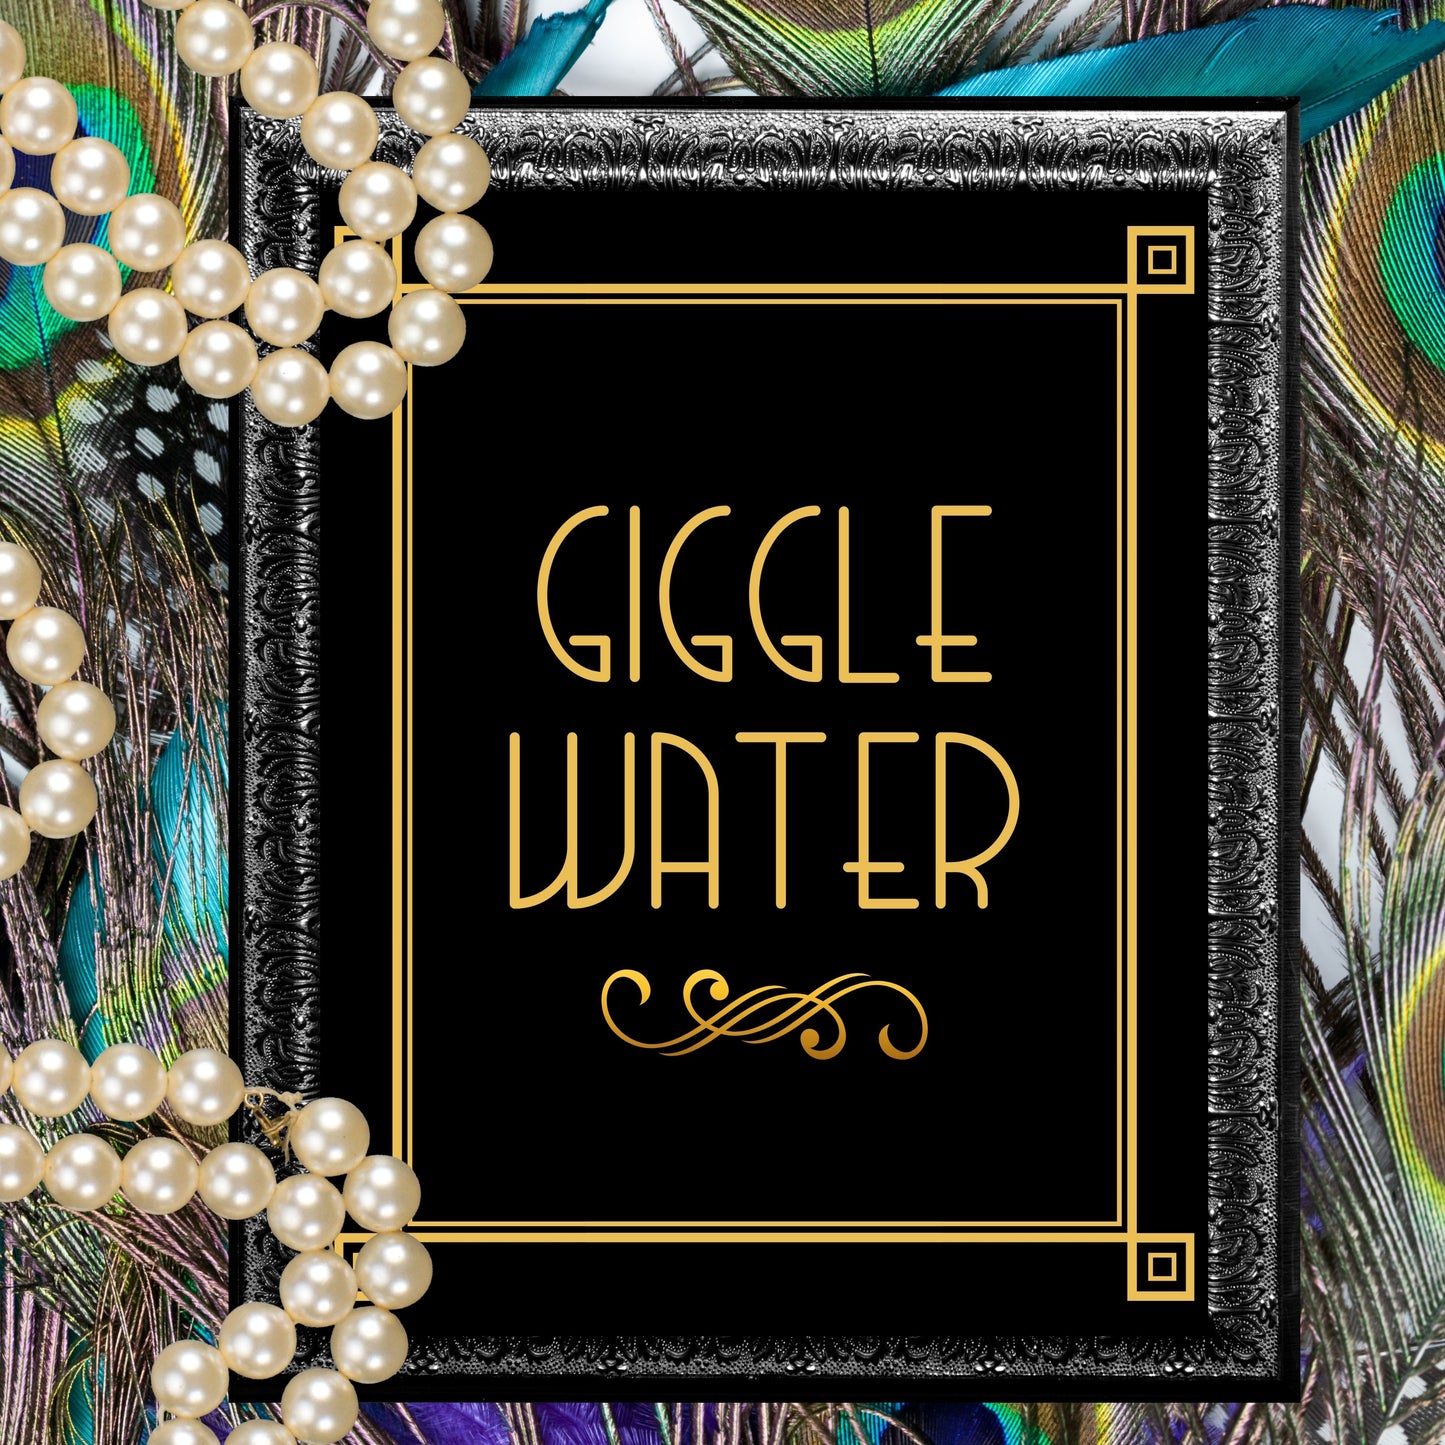 "Giggle Water" Printable Party Sign For Great Gatsby Or Roaring 20's Party Or Wedding, Black & Gold, Printable Party Decor